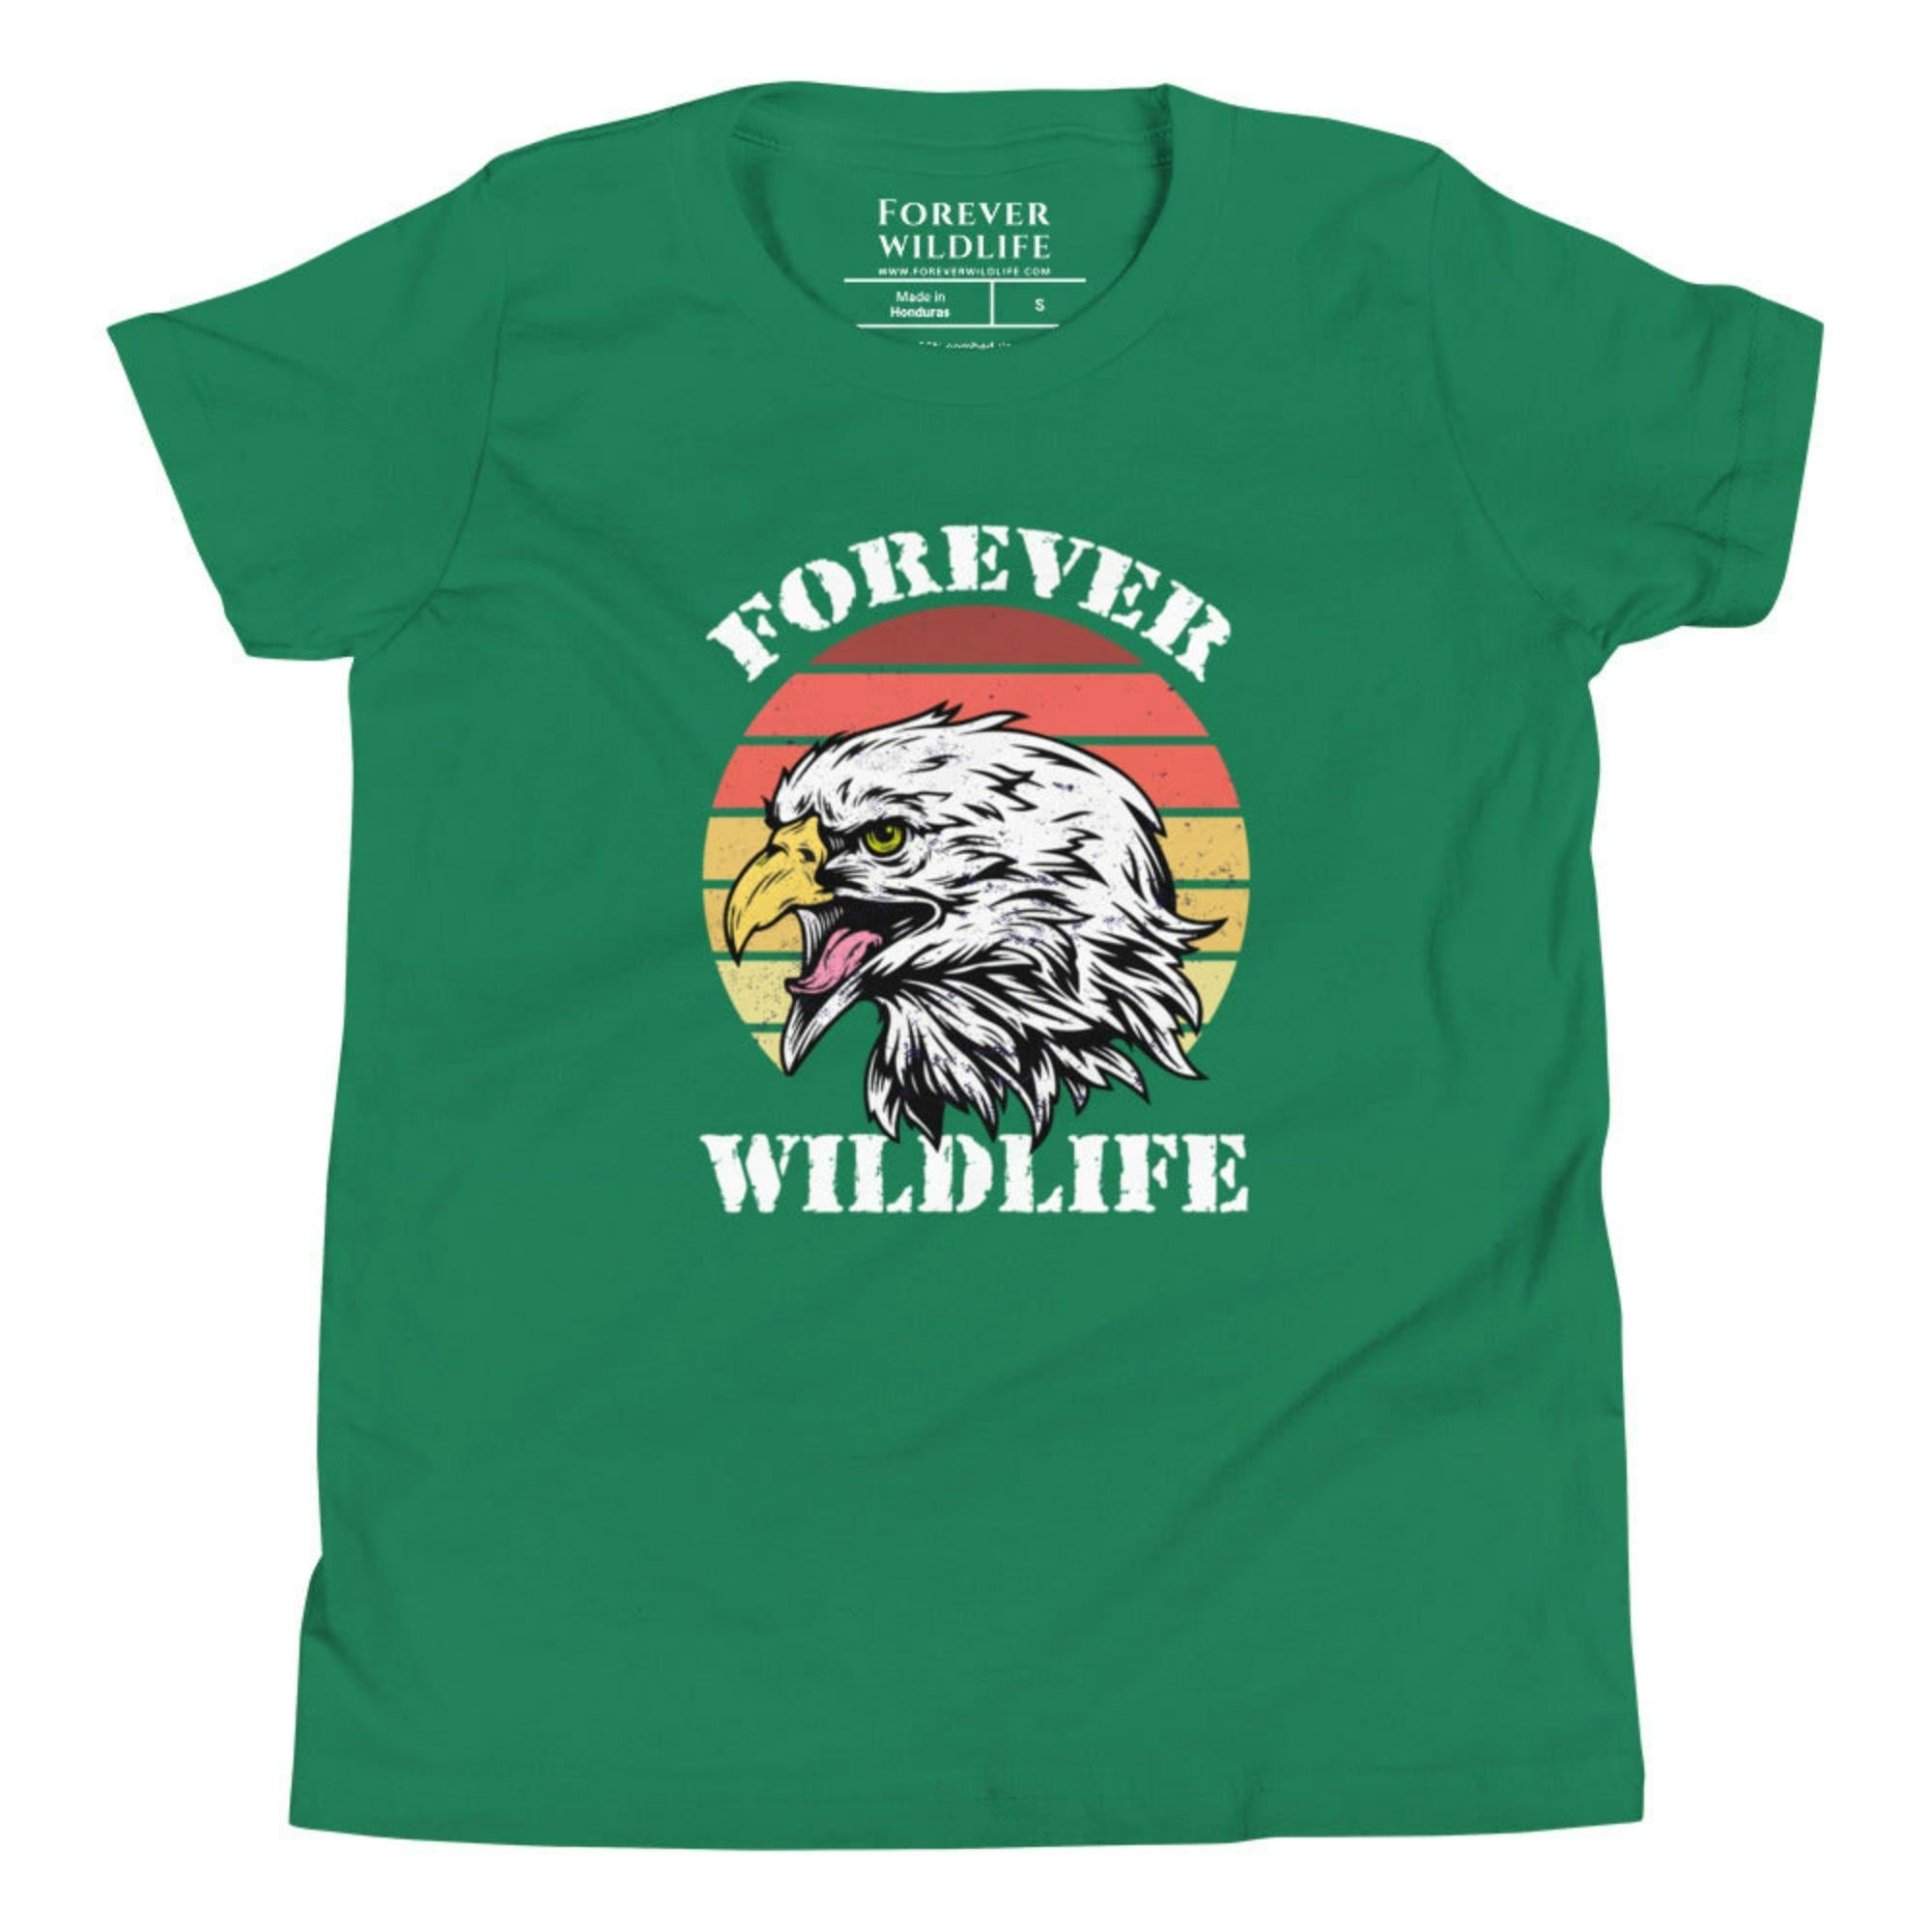 Kelly Youth T-Shirt with Eagle graphic as part of Wildlife T Shirts, Wildlife Clothing & Apparel by Forever Wildlife